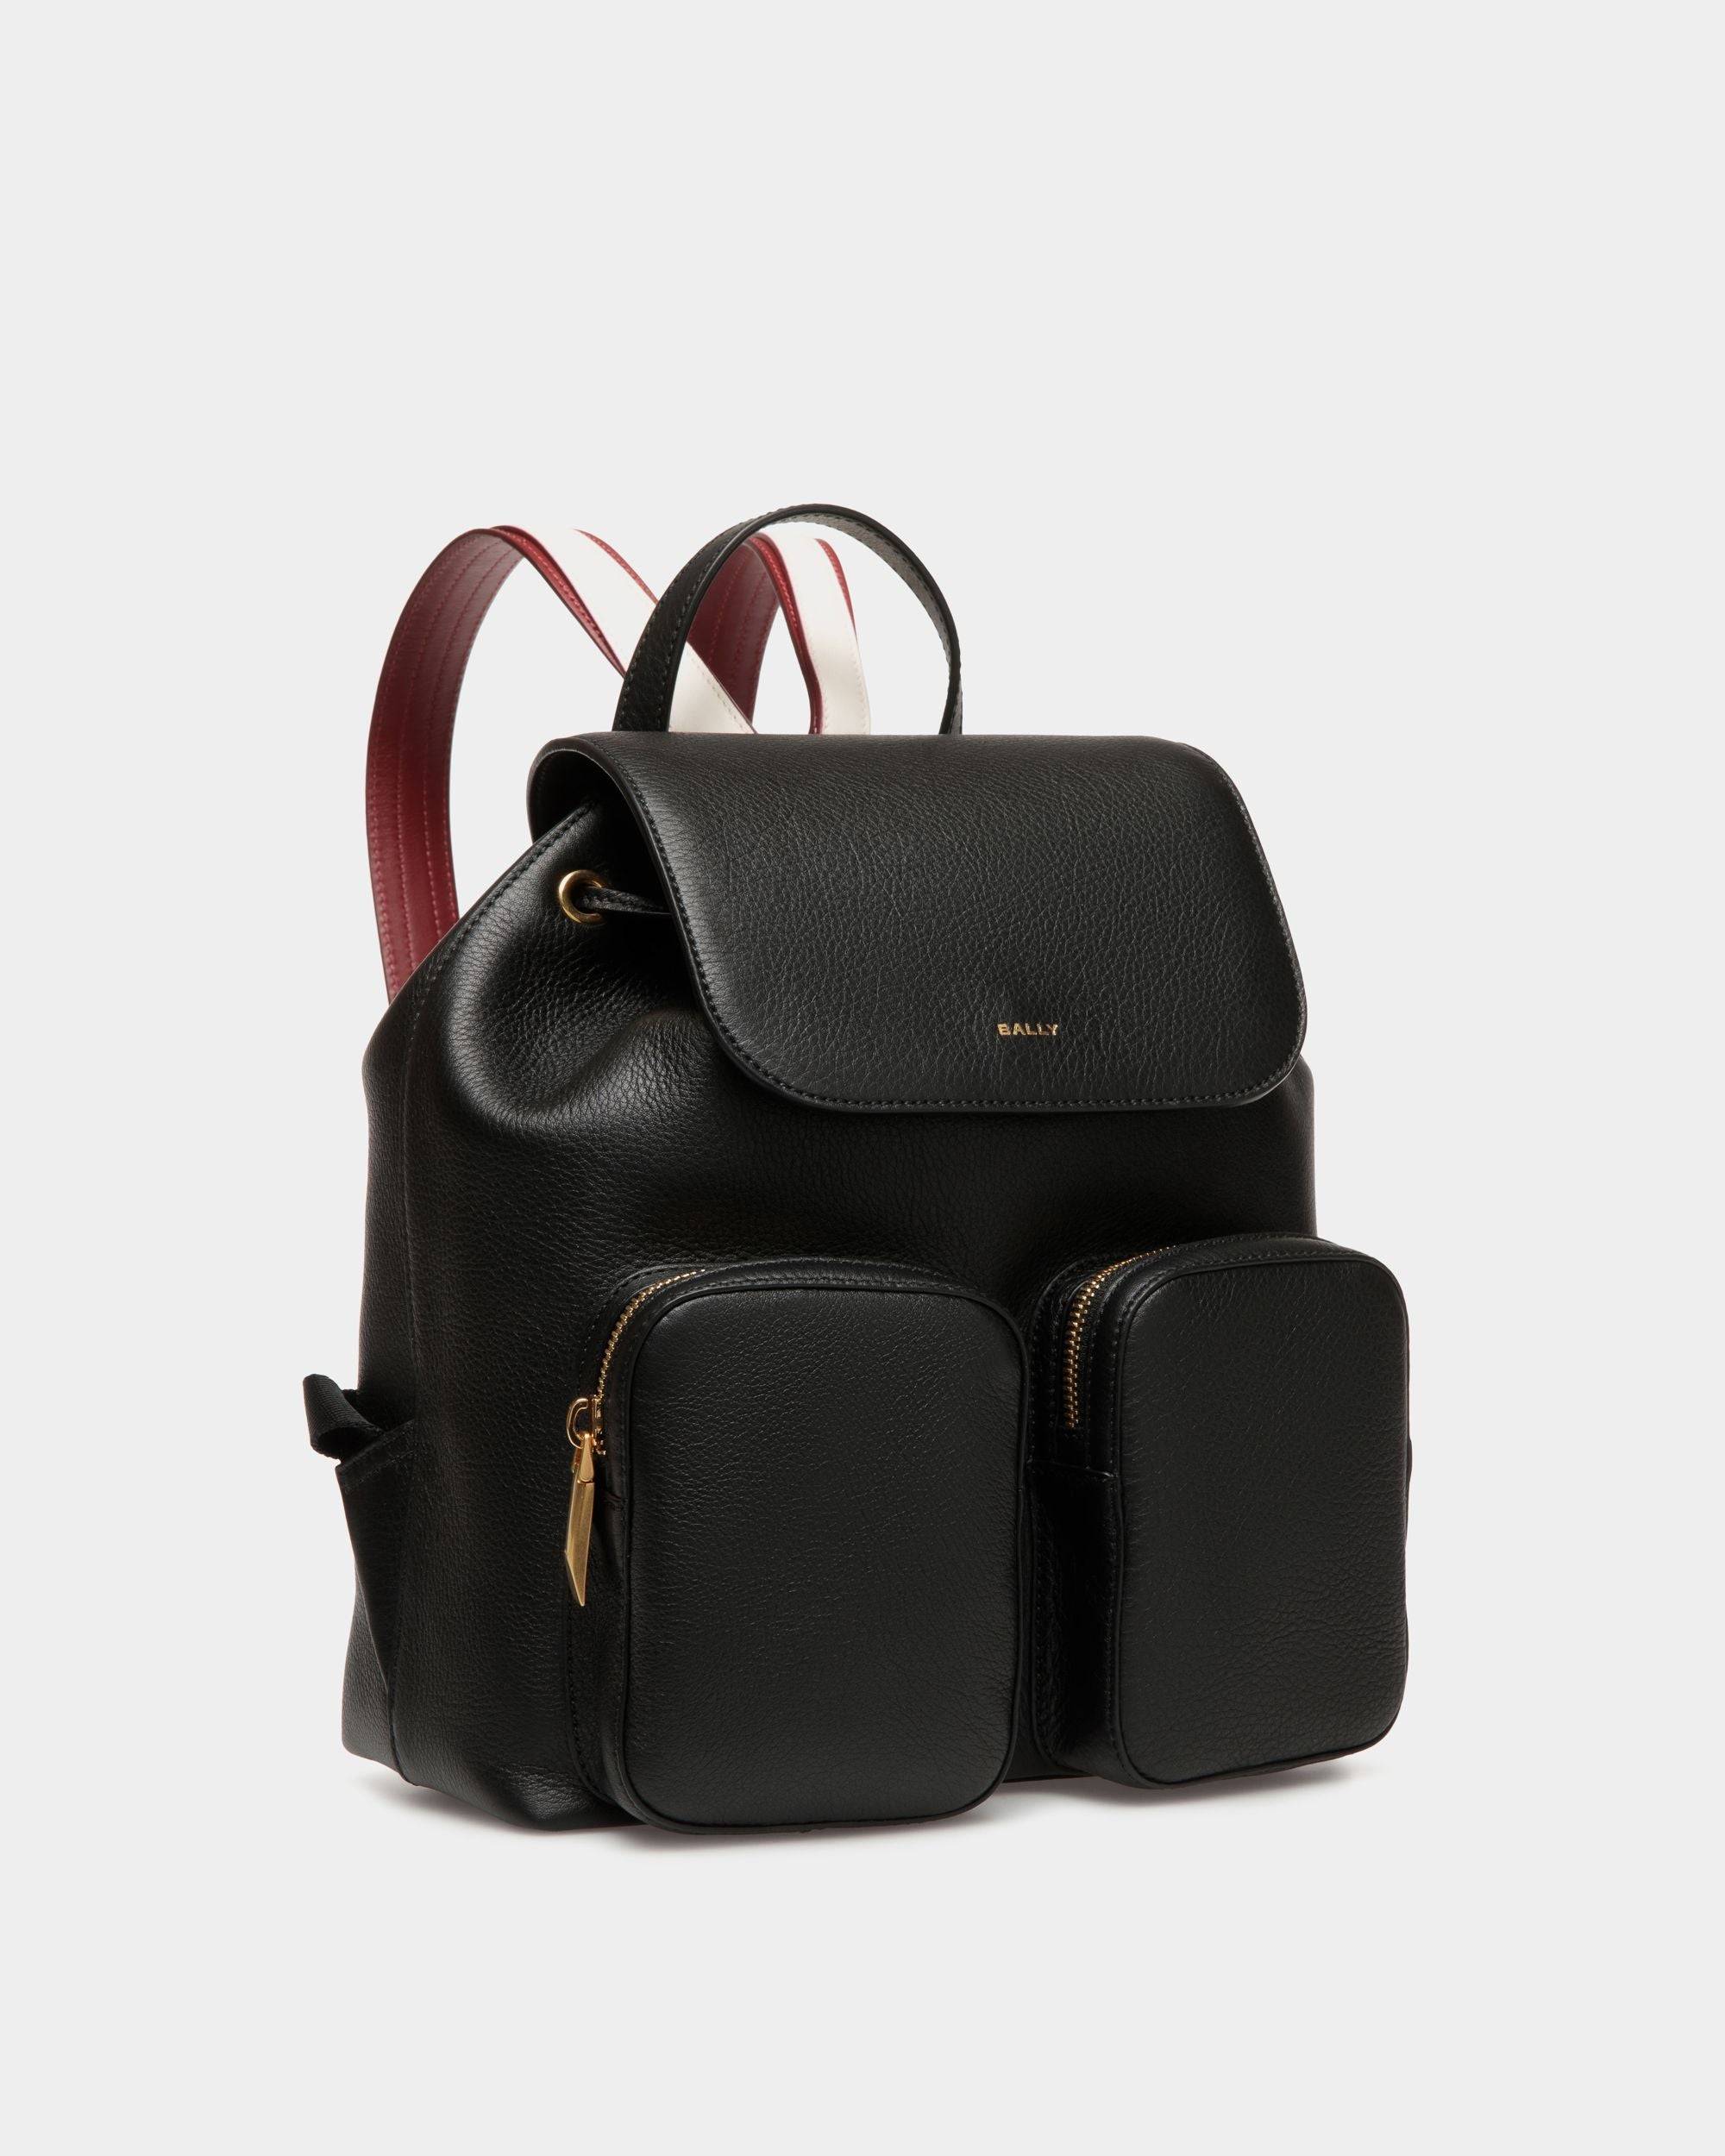 Code Backpack in Black Leather - Women's - Bally - 03